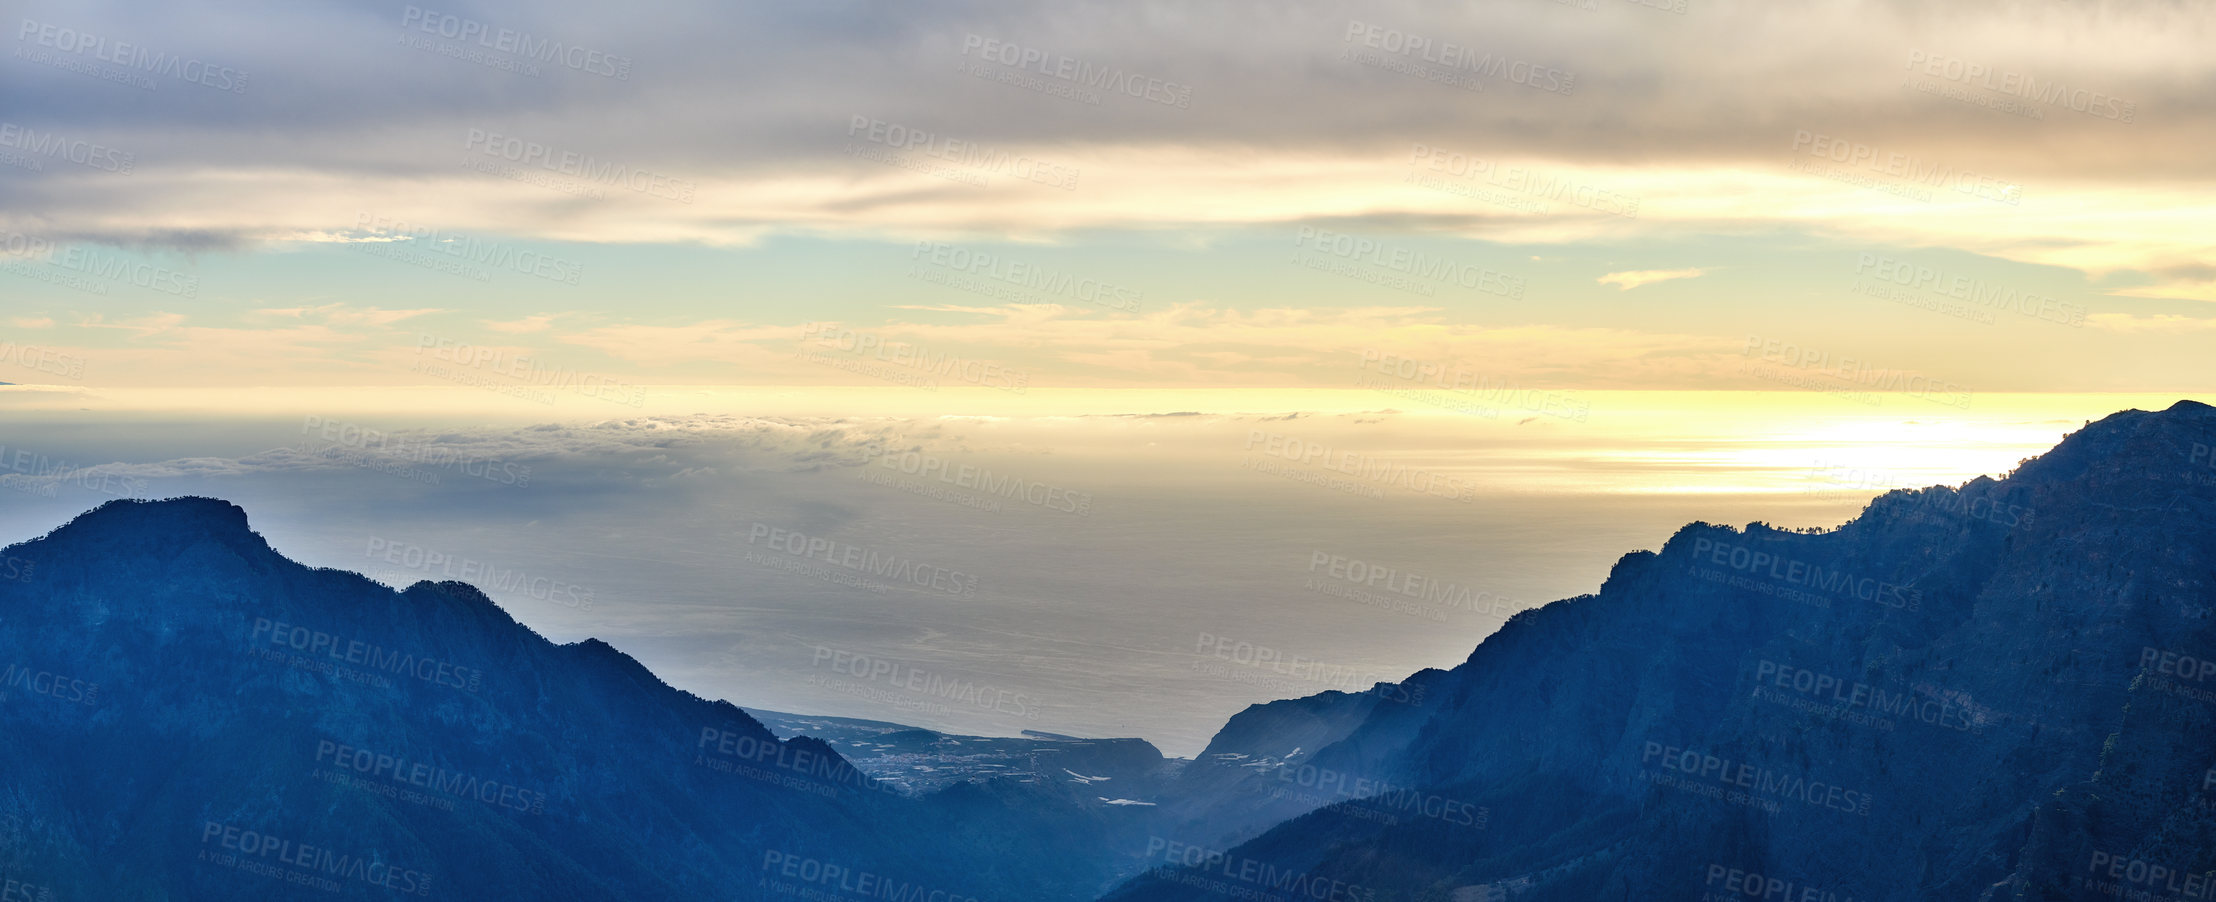 Buy stock photo Beautiful landscape of a mountain during sunset with a cloudy sky on a summer day. Peaceful and scenic view of peaks during a golden sunrise with copy space. Aerial view of uncultivated nature